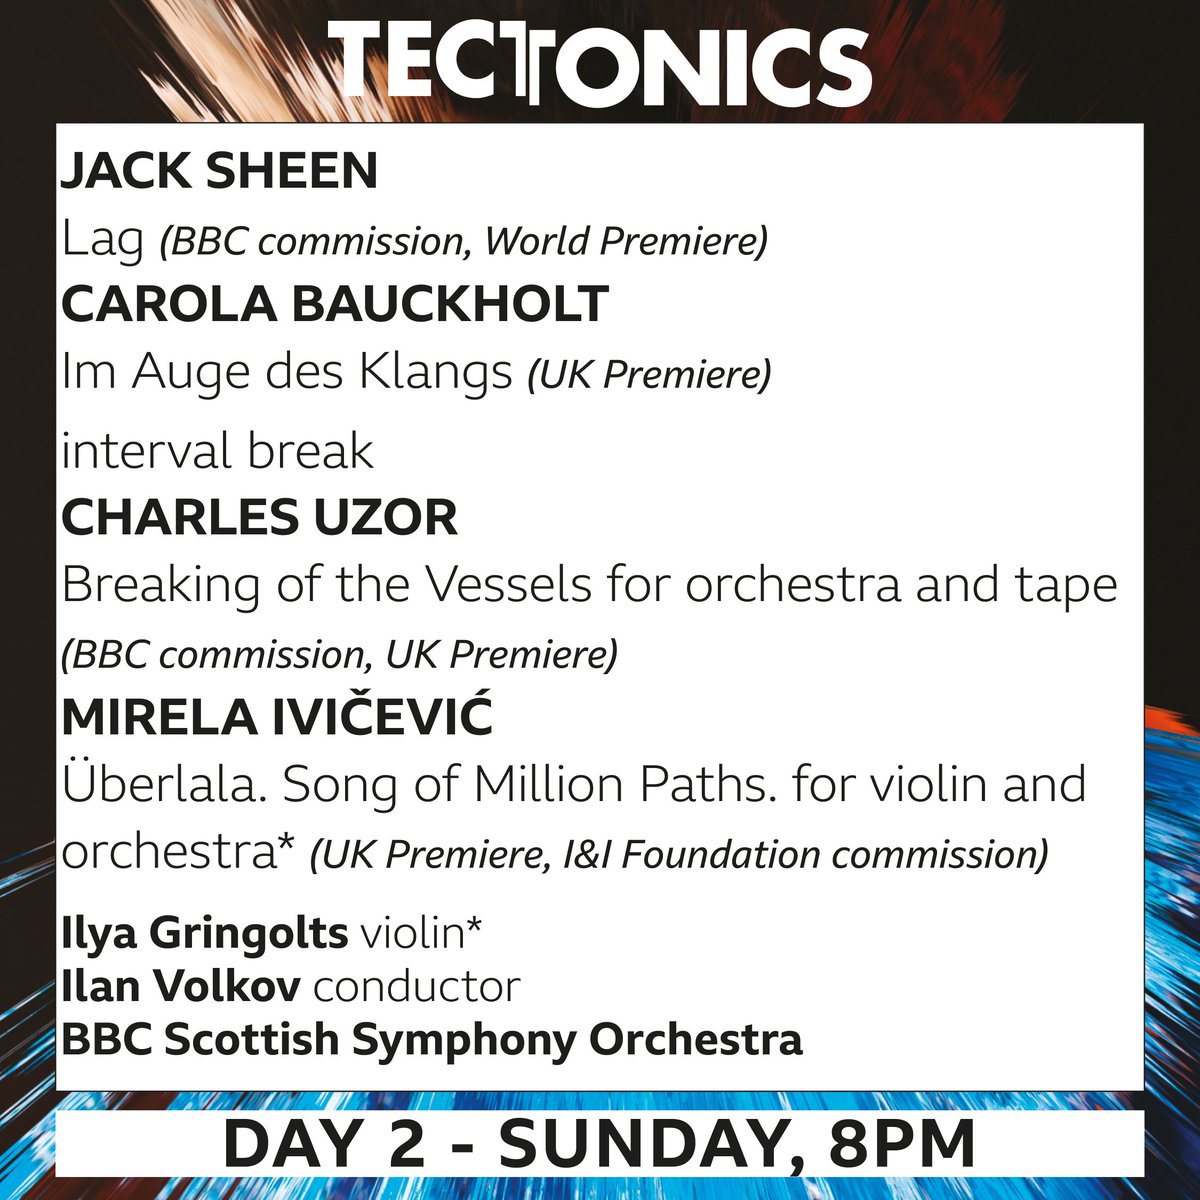 💥 8pm on Saturday & Sunday! The @BBCSSO presents a series of BBC commissions, world premieres & UK premieres with Ilan Volkov on the podium. Violinist @IGringolts (both nights) & turntablist @MariamRezaei (Sat) join as soloists. bbc.co.uk/tectonics